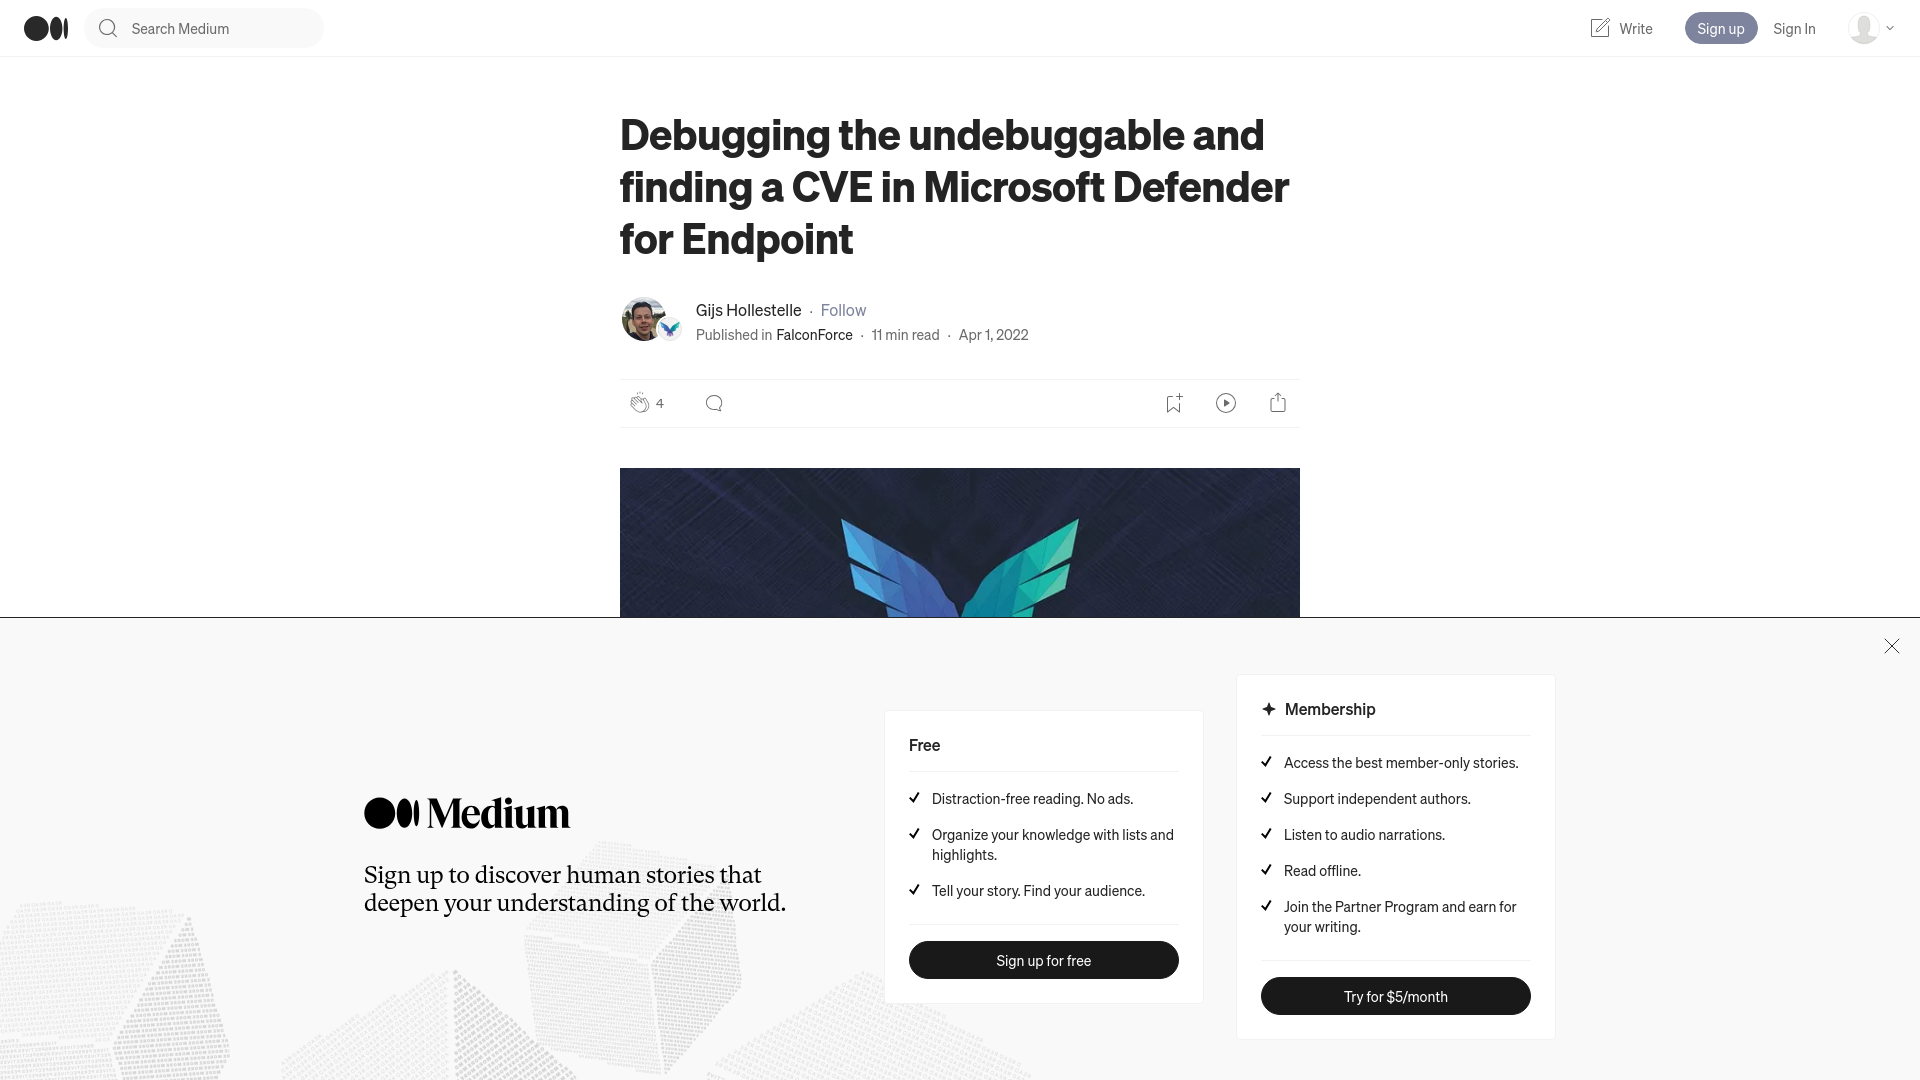 Debugging the undebuggable and finding a CVE in Microsoft Defender for Endpoint | by Gijs Hollestelle | FalconForce | Medium